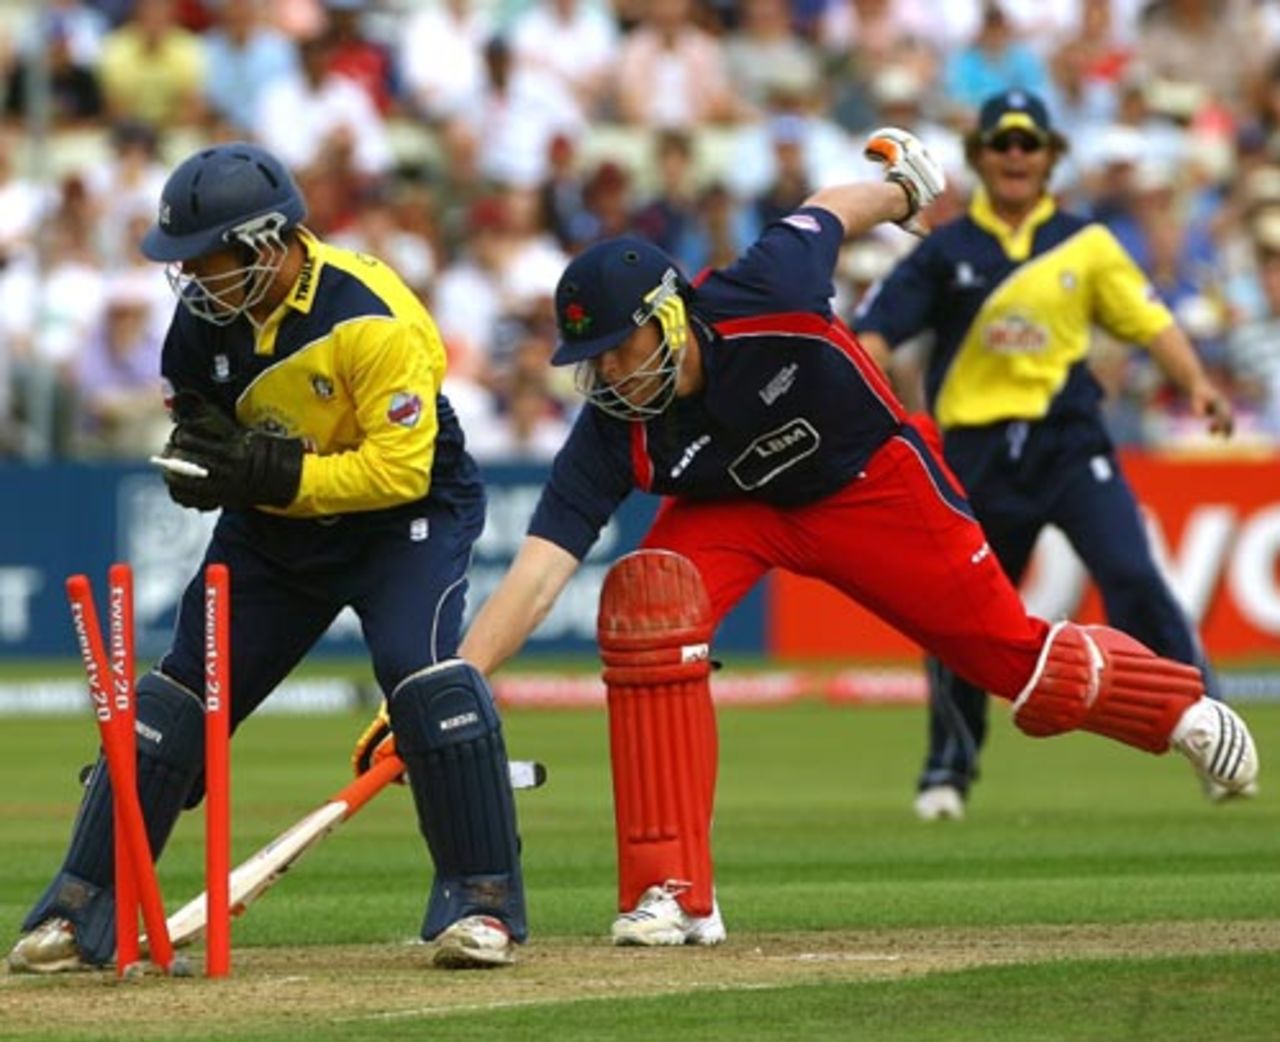 Andrew Flintoff fails to make his ground after being sent back by Brad Hodge, Gloucestershire v Lancashire, Twenty20 Cup, 1st semi-final, Edgbaston, August 4, 2007